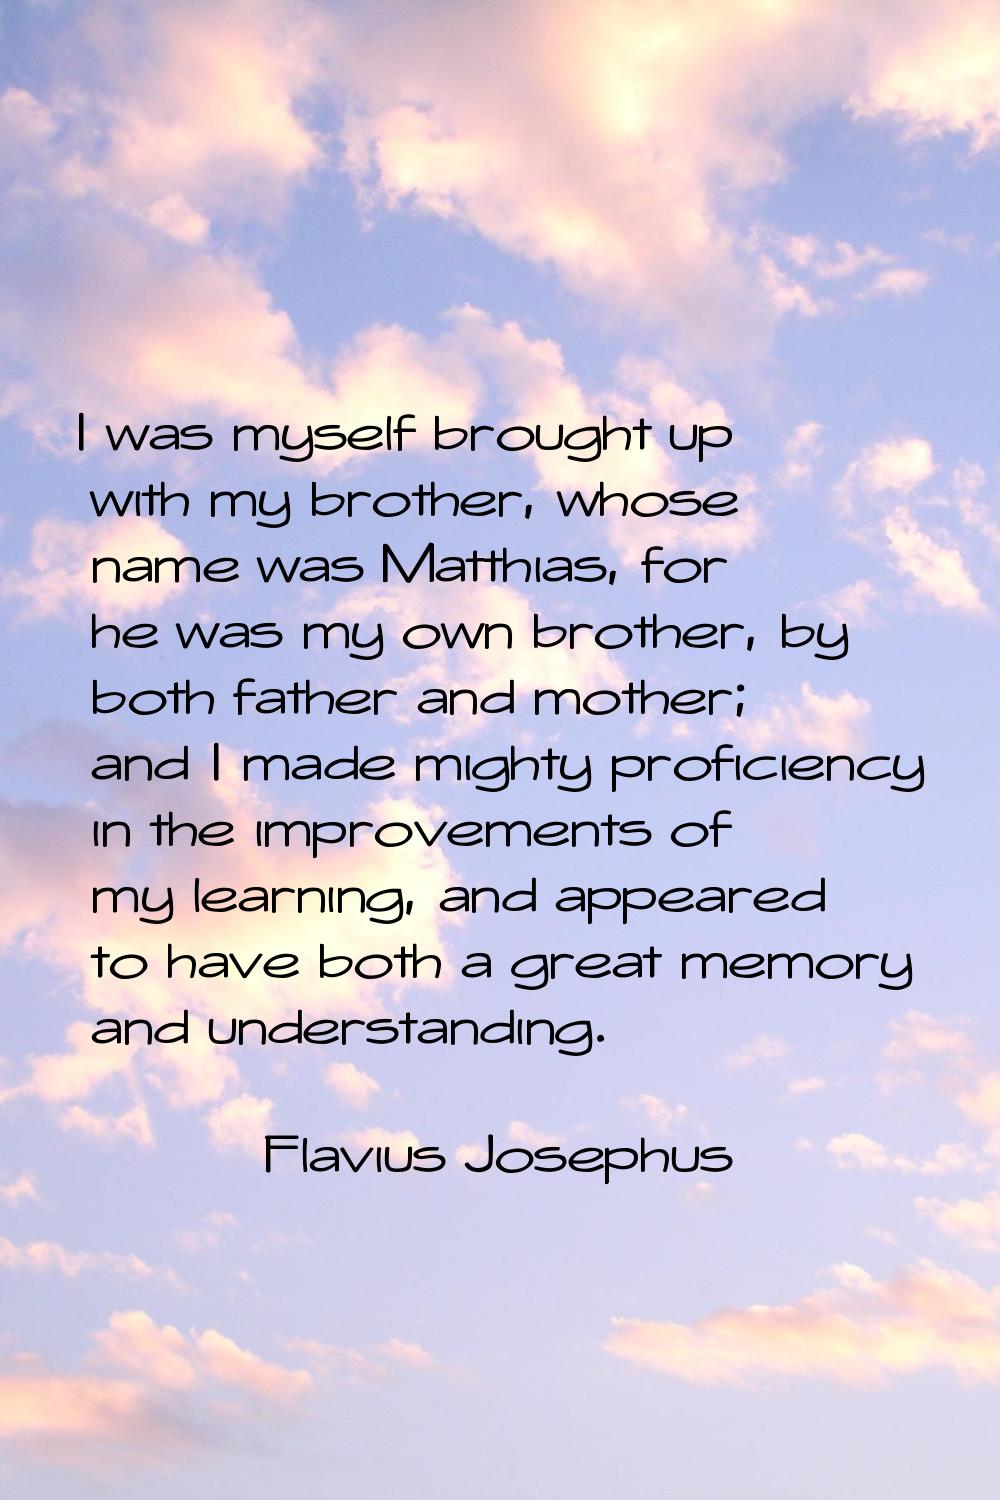 I was myself brought up with my brother, whose name was Matthias, for he was my own brother, by bot